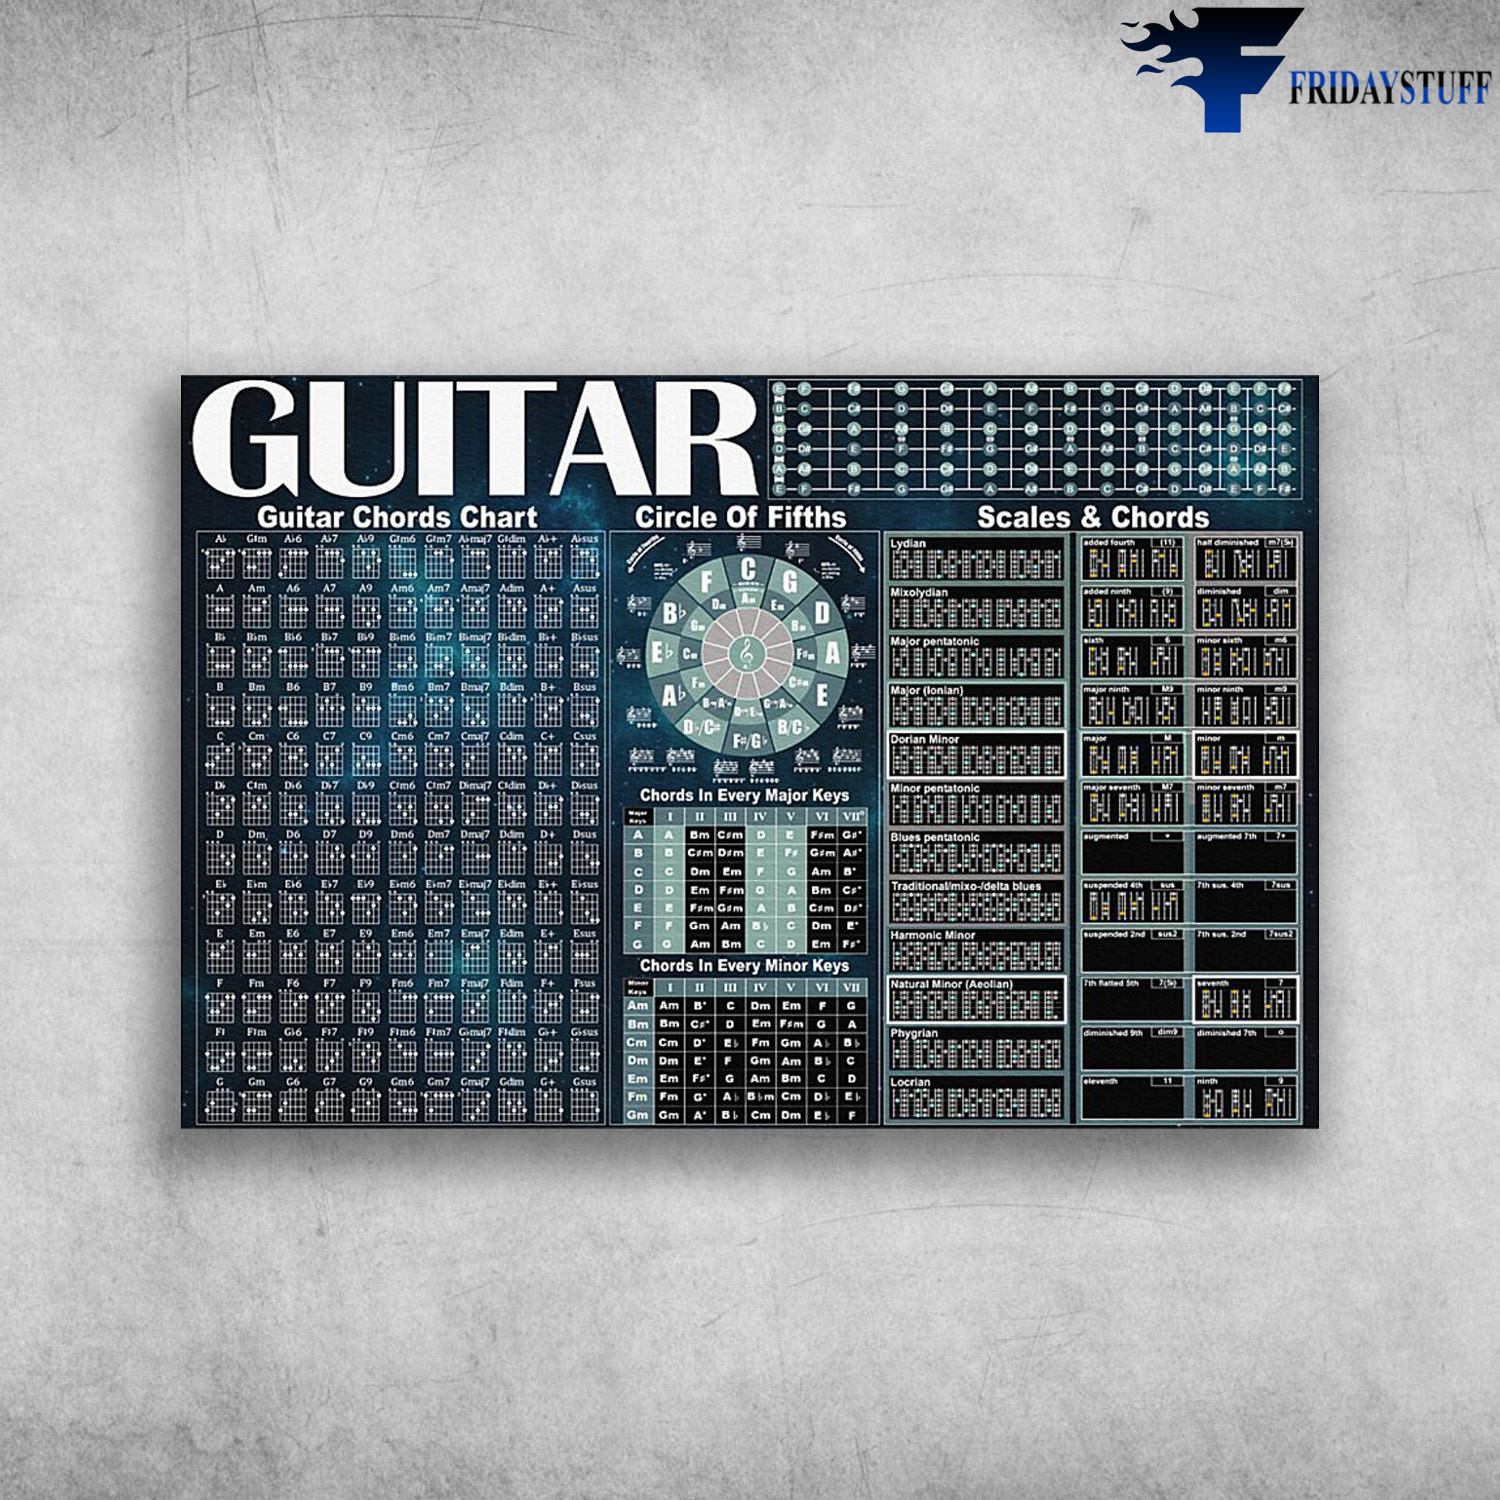 The Knowledge About Guitar – Guitar Chords Chart, Circle Of Fifths, Chords In Every Major Keys, Chords In Every Minor Keys, Scale And Chords